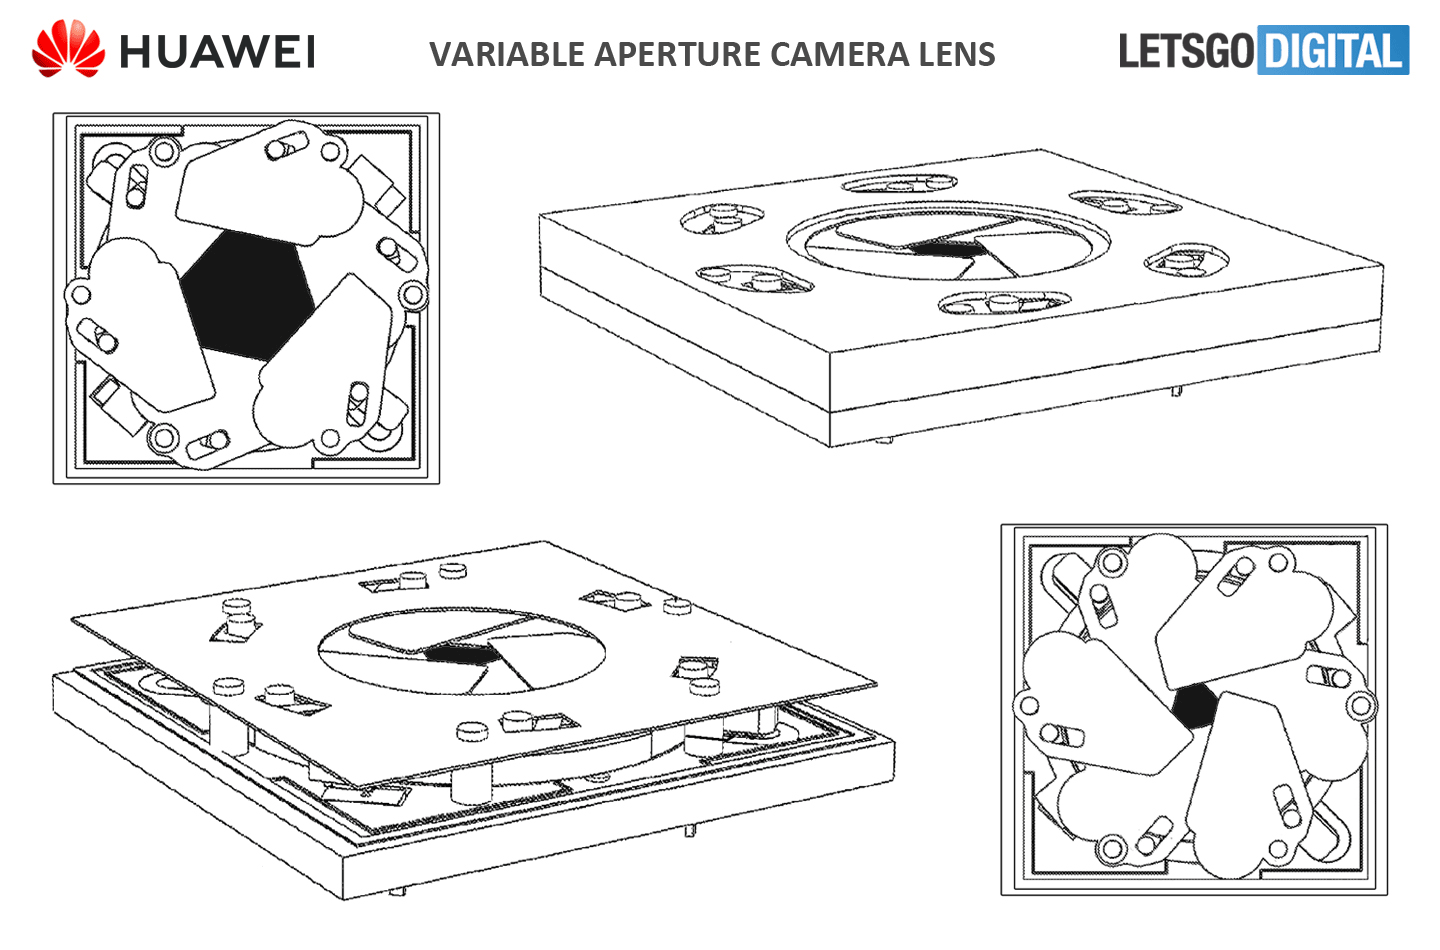 Huawei's patented variable aperture design